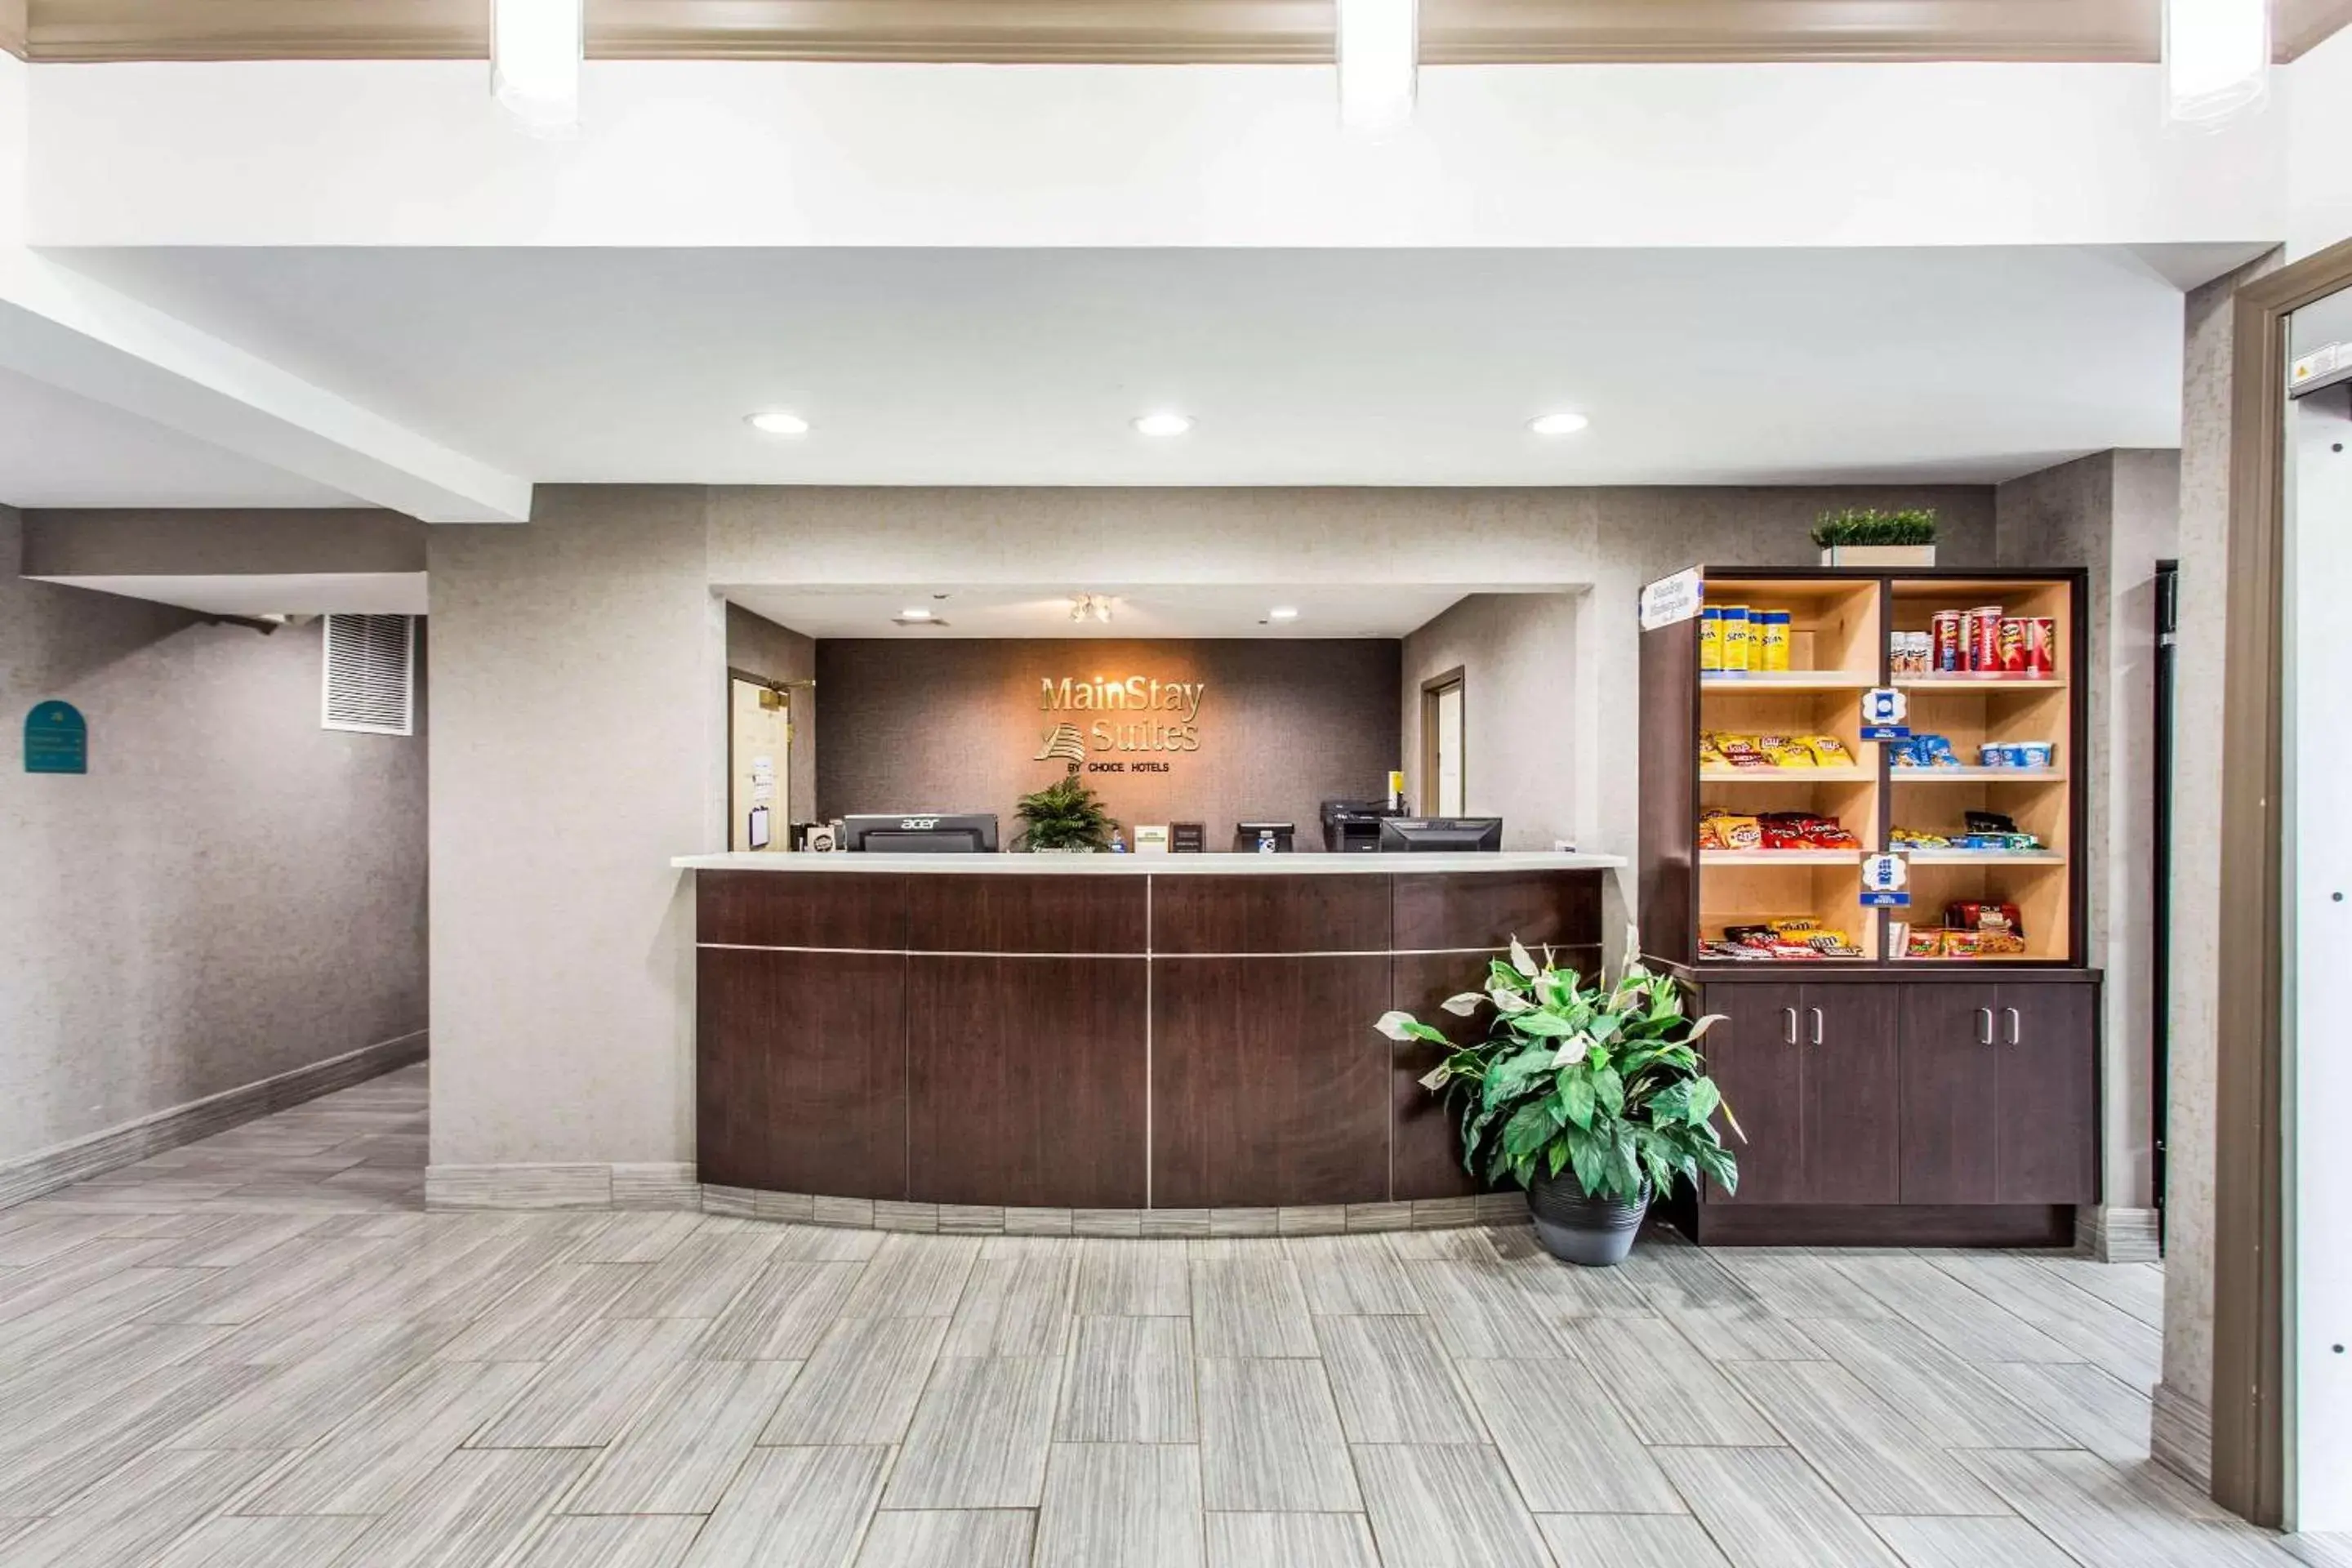 Lobby or reception in MainStay Suites Greenville Airport